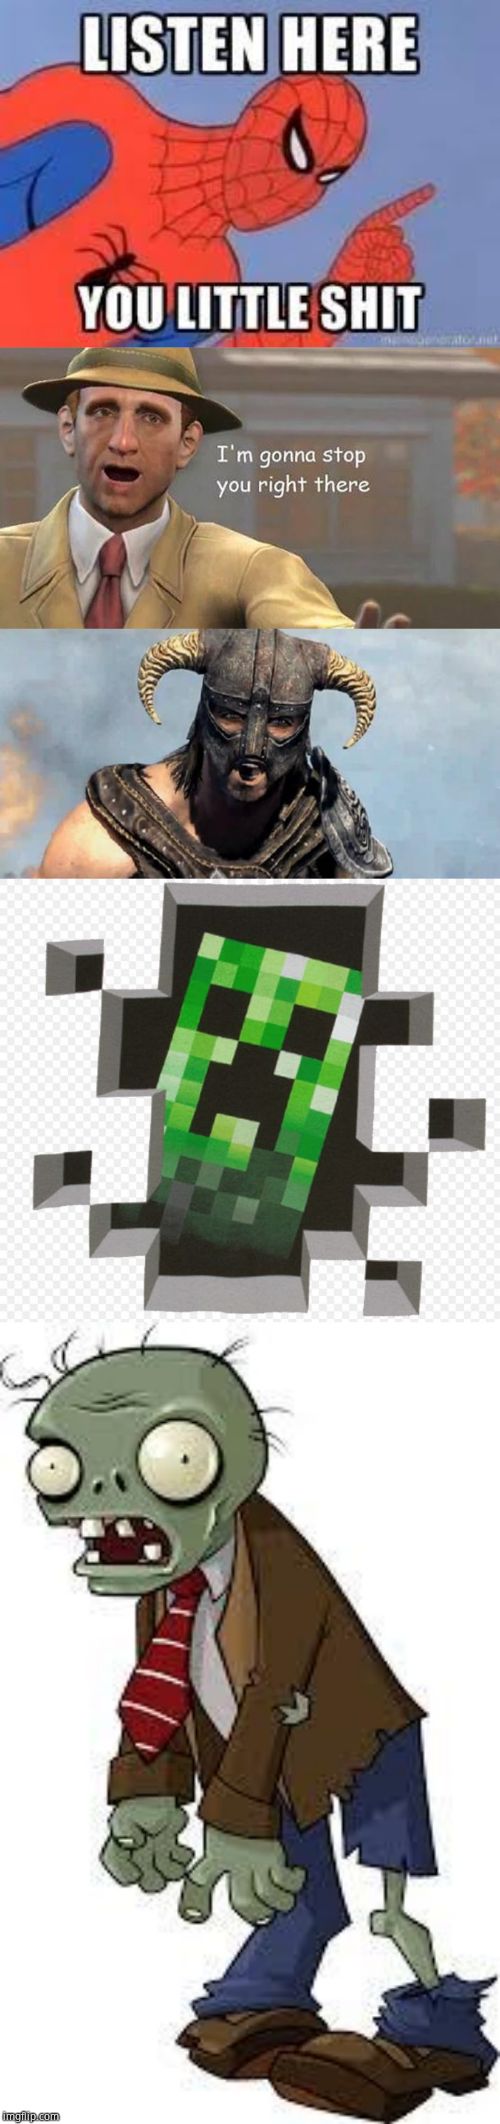 image tagged in pvz zombie,skyrim,minecraft creeper,i'm gonna stop you right there,now listen here you little shit | made w/ Imgflip meme maker